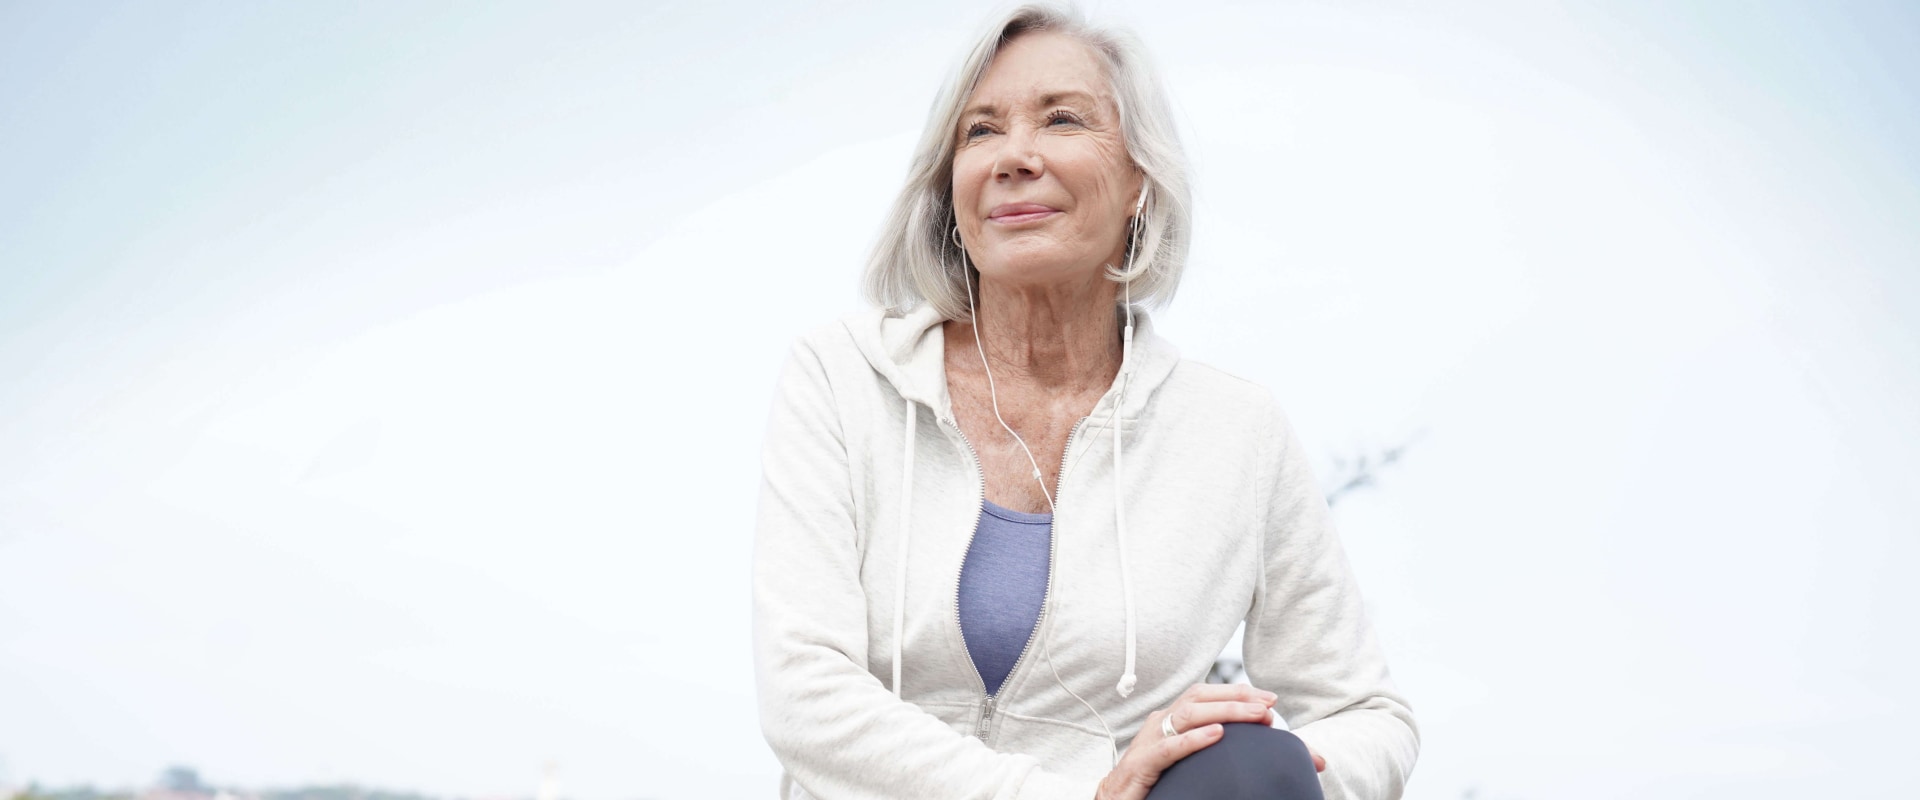 Exercising After Cataract Surgery: What You Need to Know